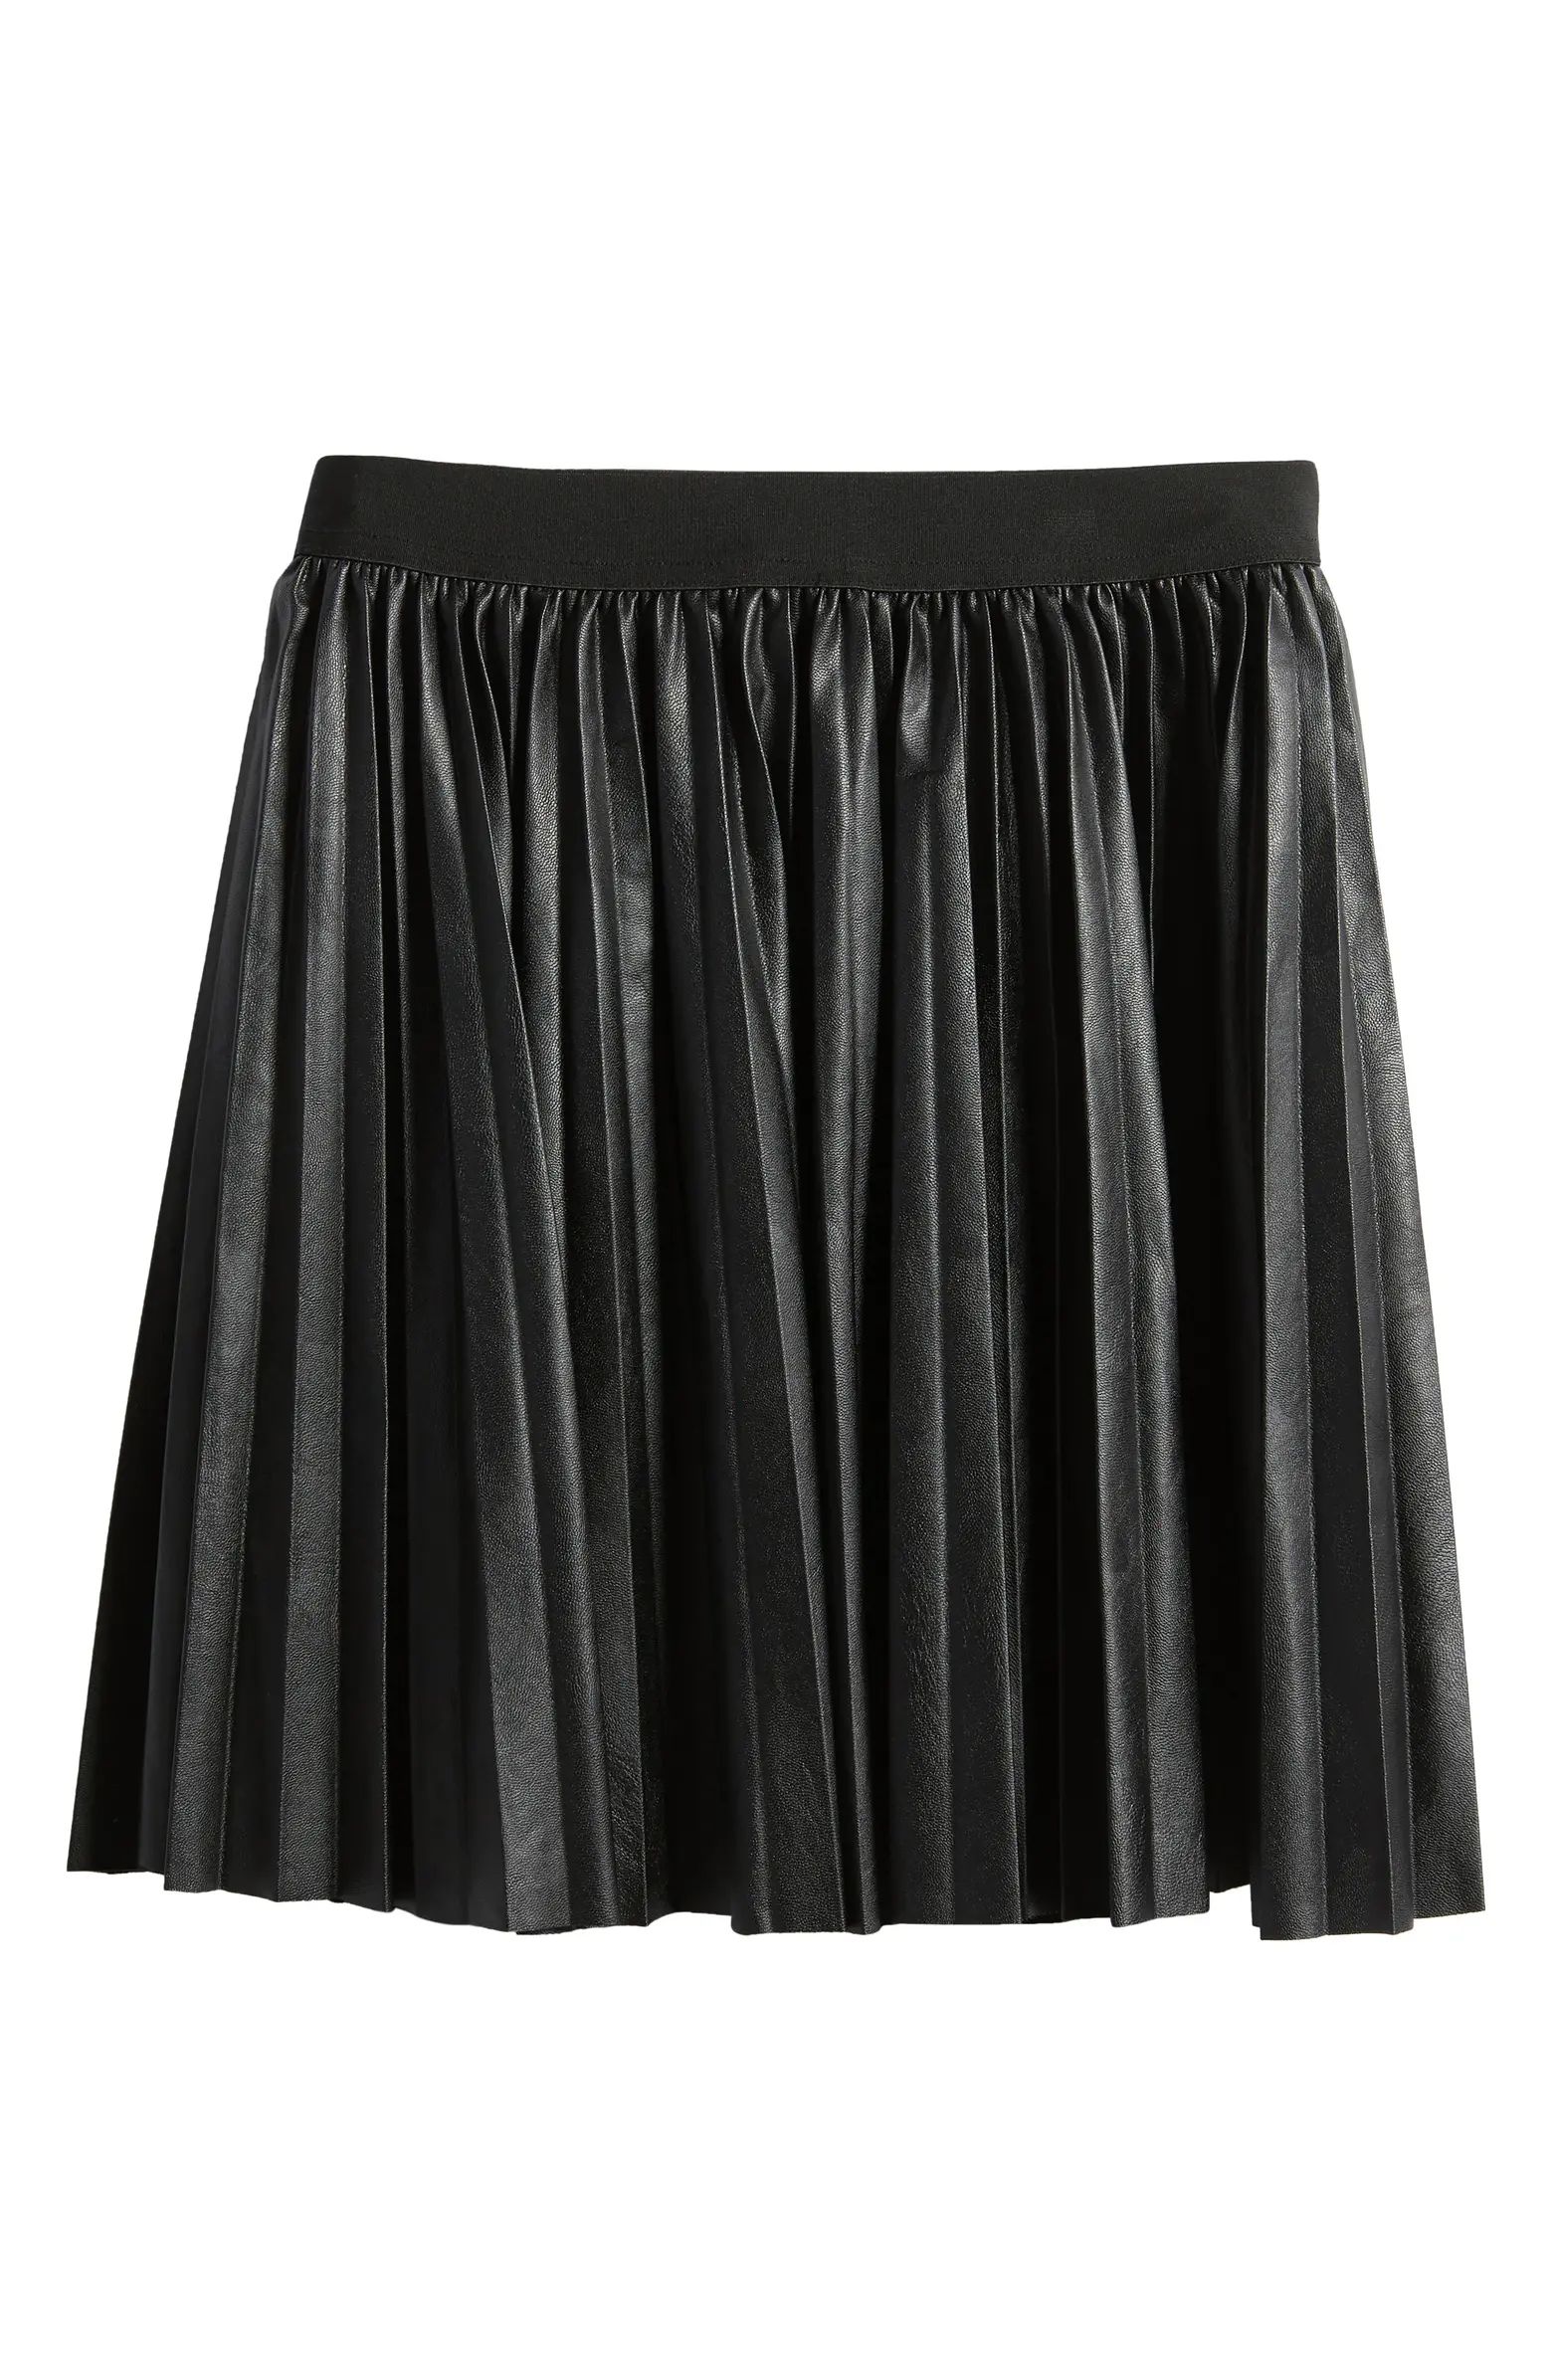 Kids' Pleated Faux Leather Skirt | Nordstrom